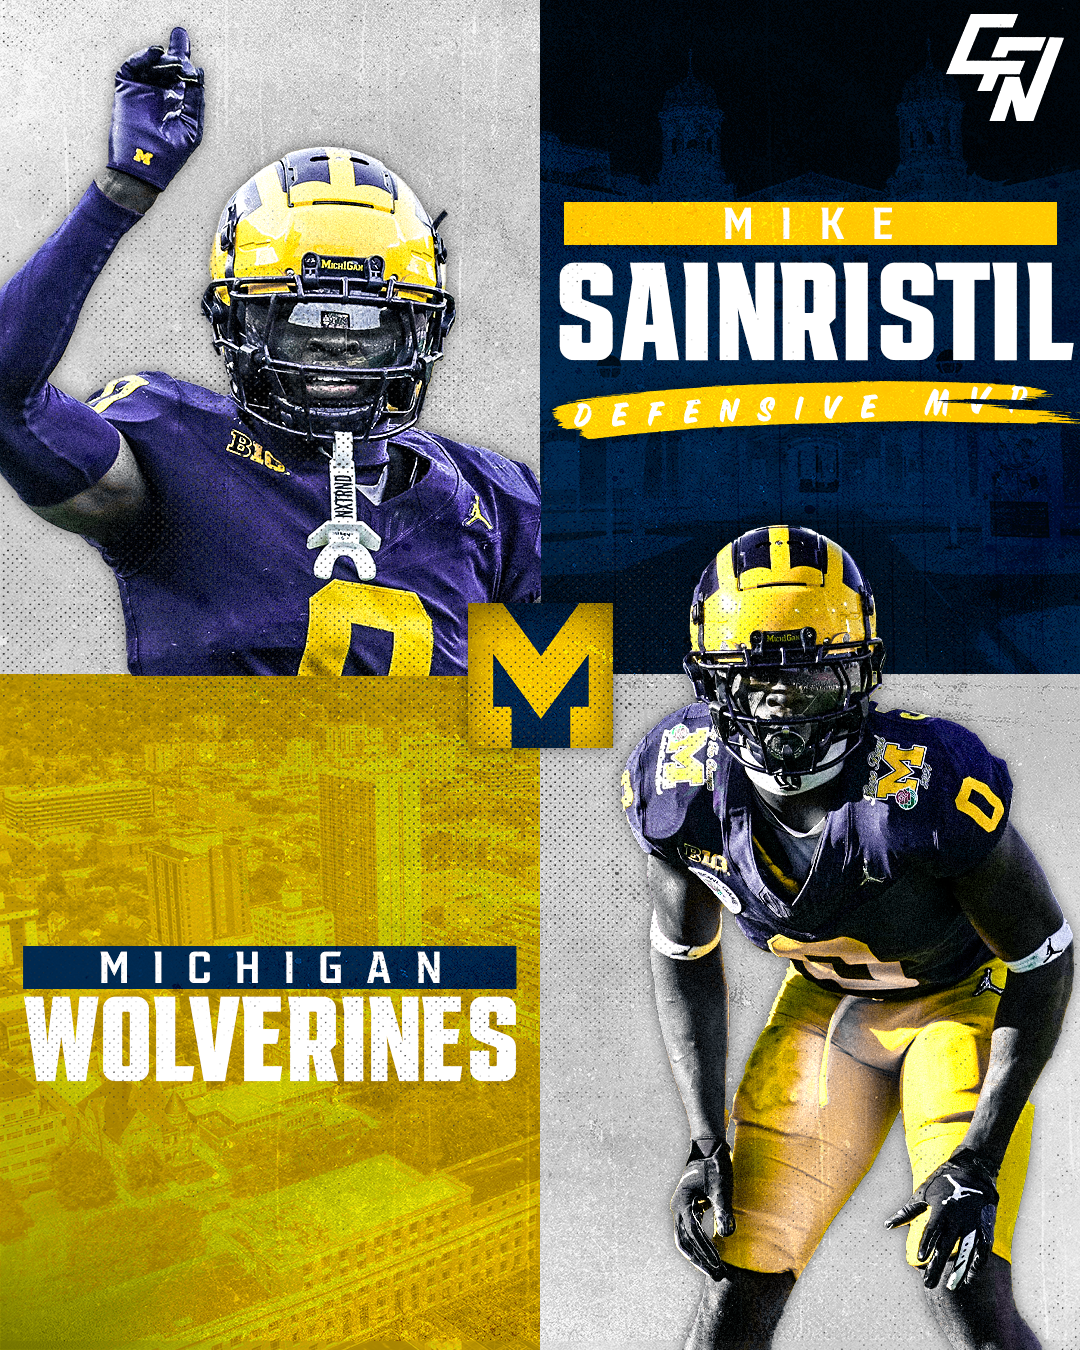 Mike Sainristil impressed in Michigan's National Championship victory over Washington, earning Defensive MVP honors.